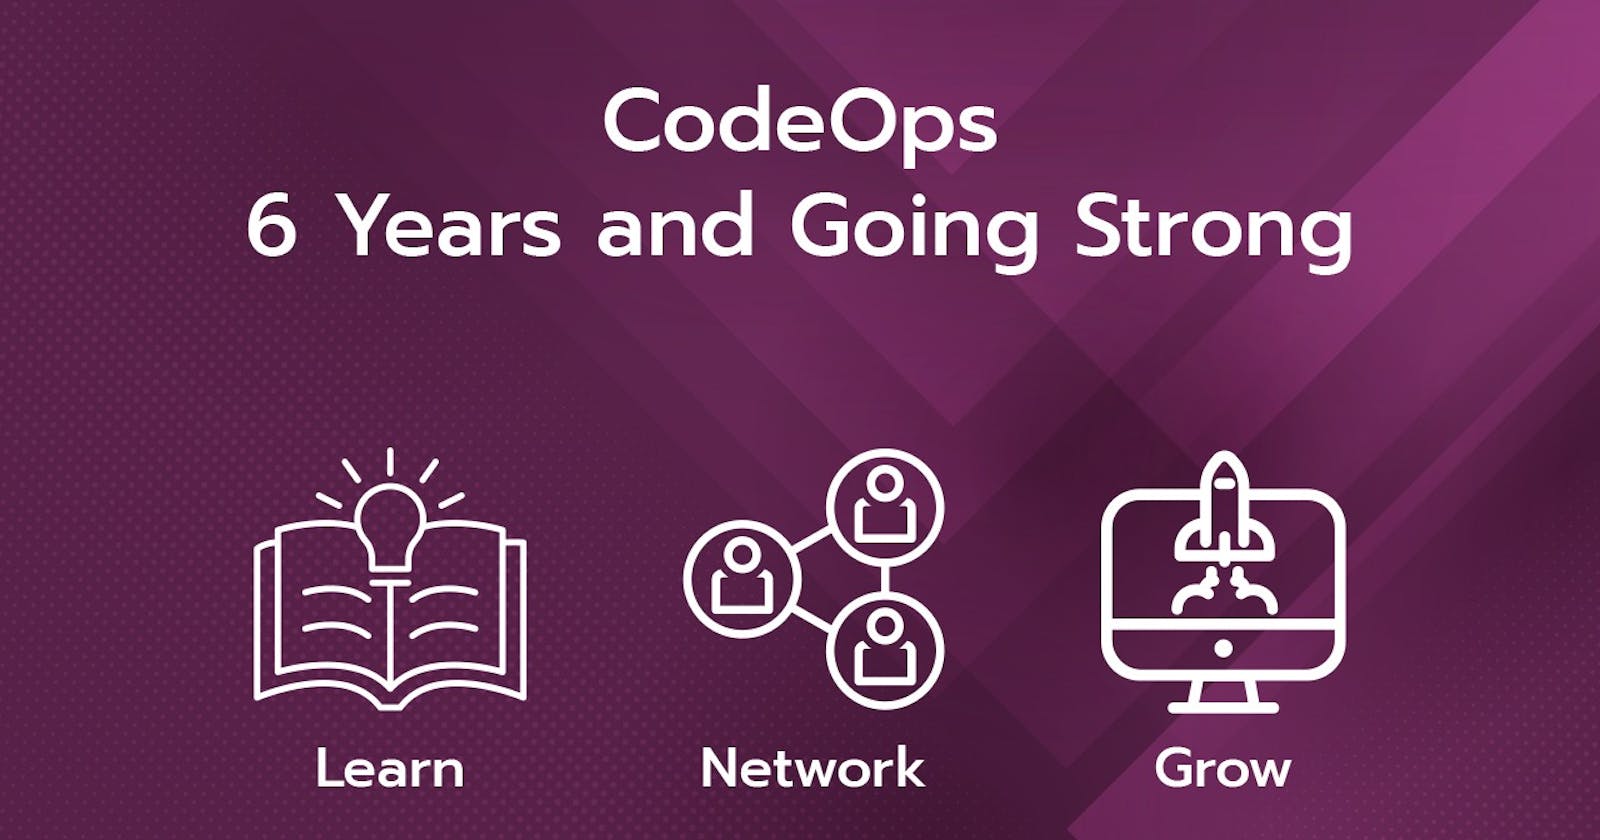 CodeOps — 6 Years and Going Strong